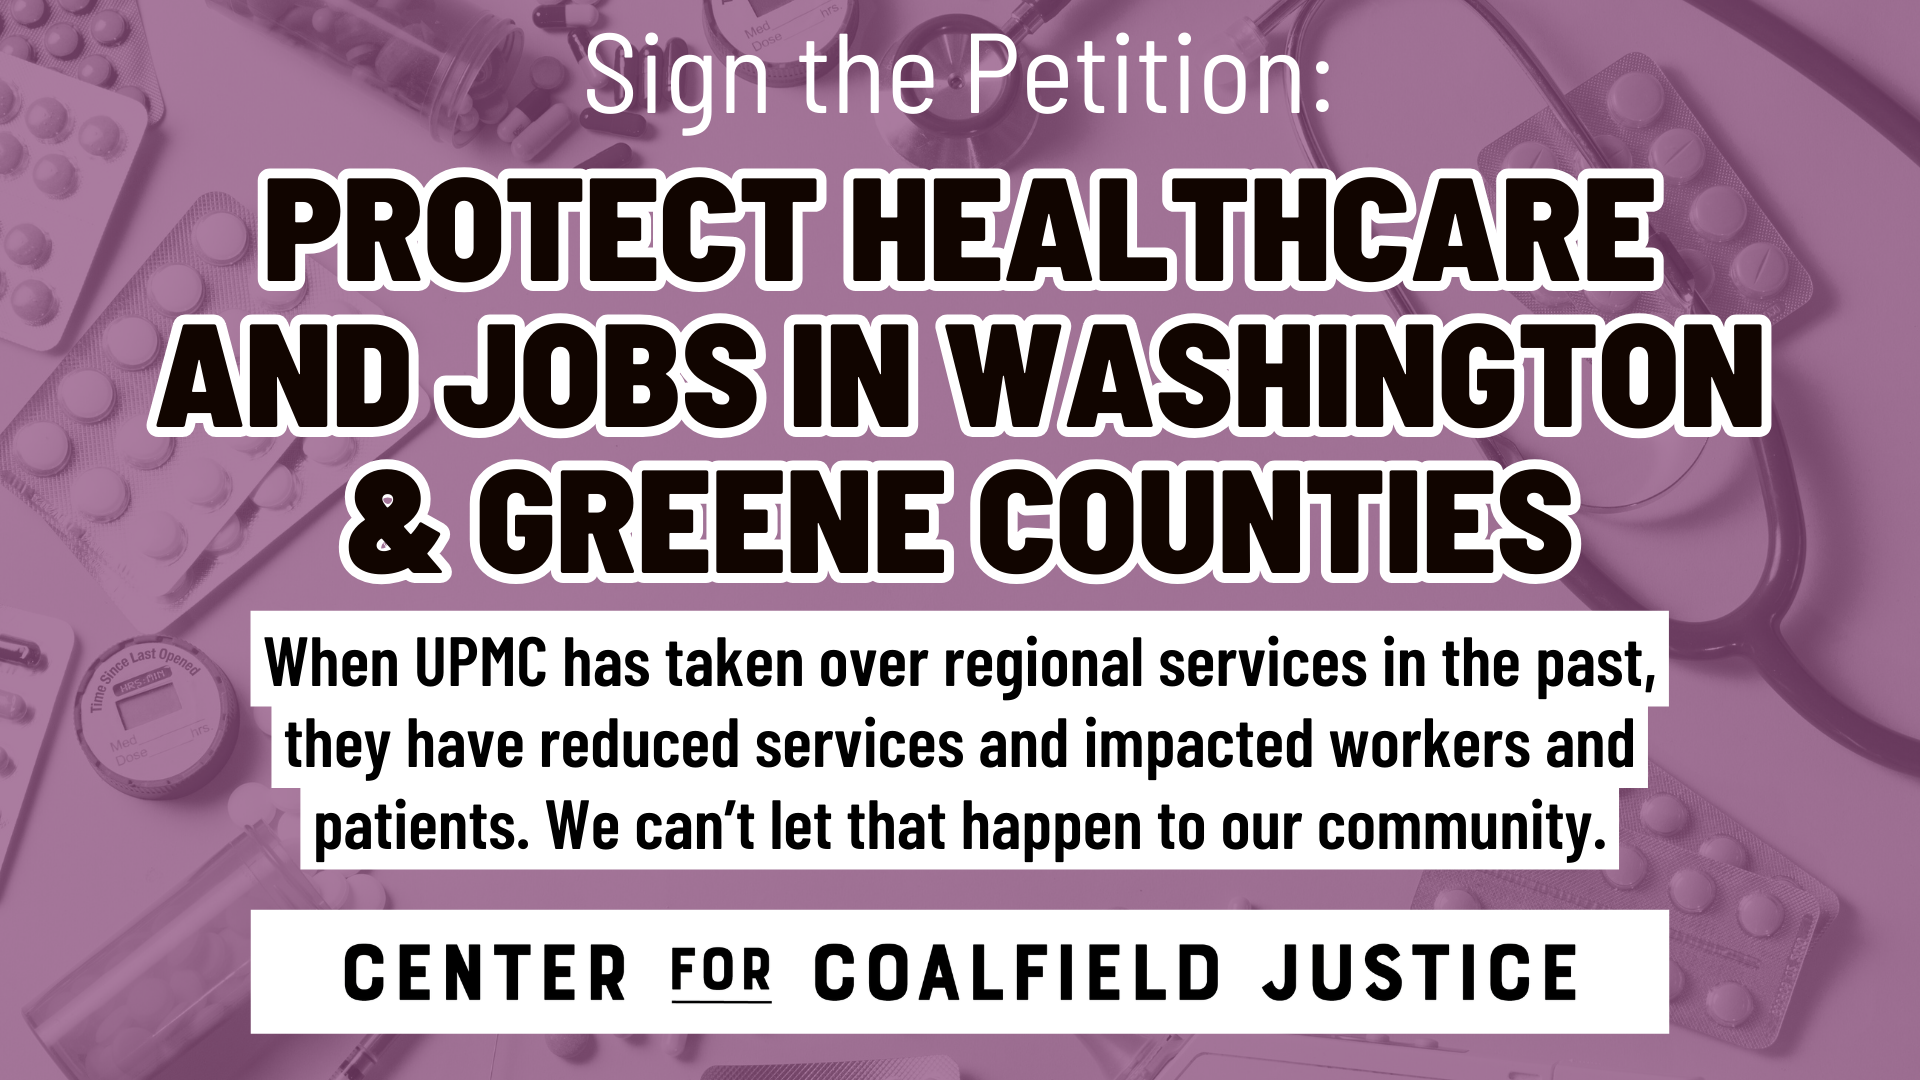 UPMC Petition Cover Graphic